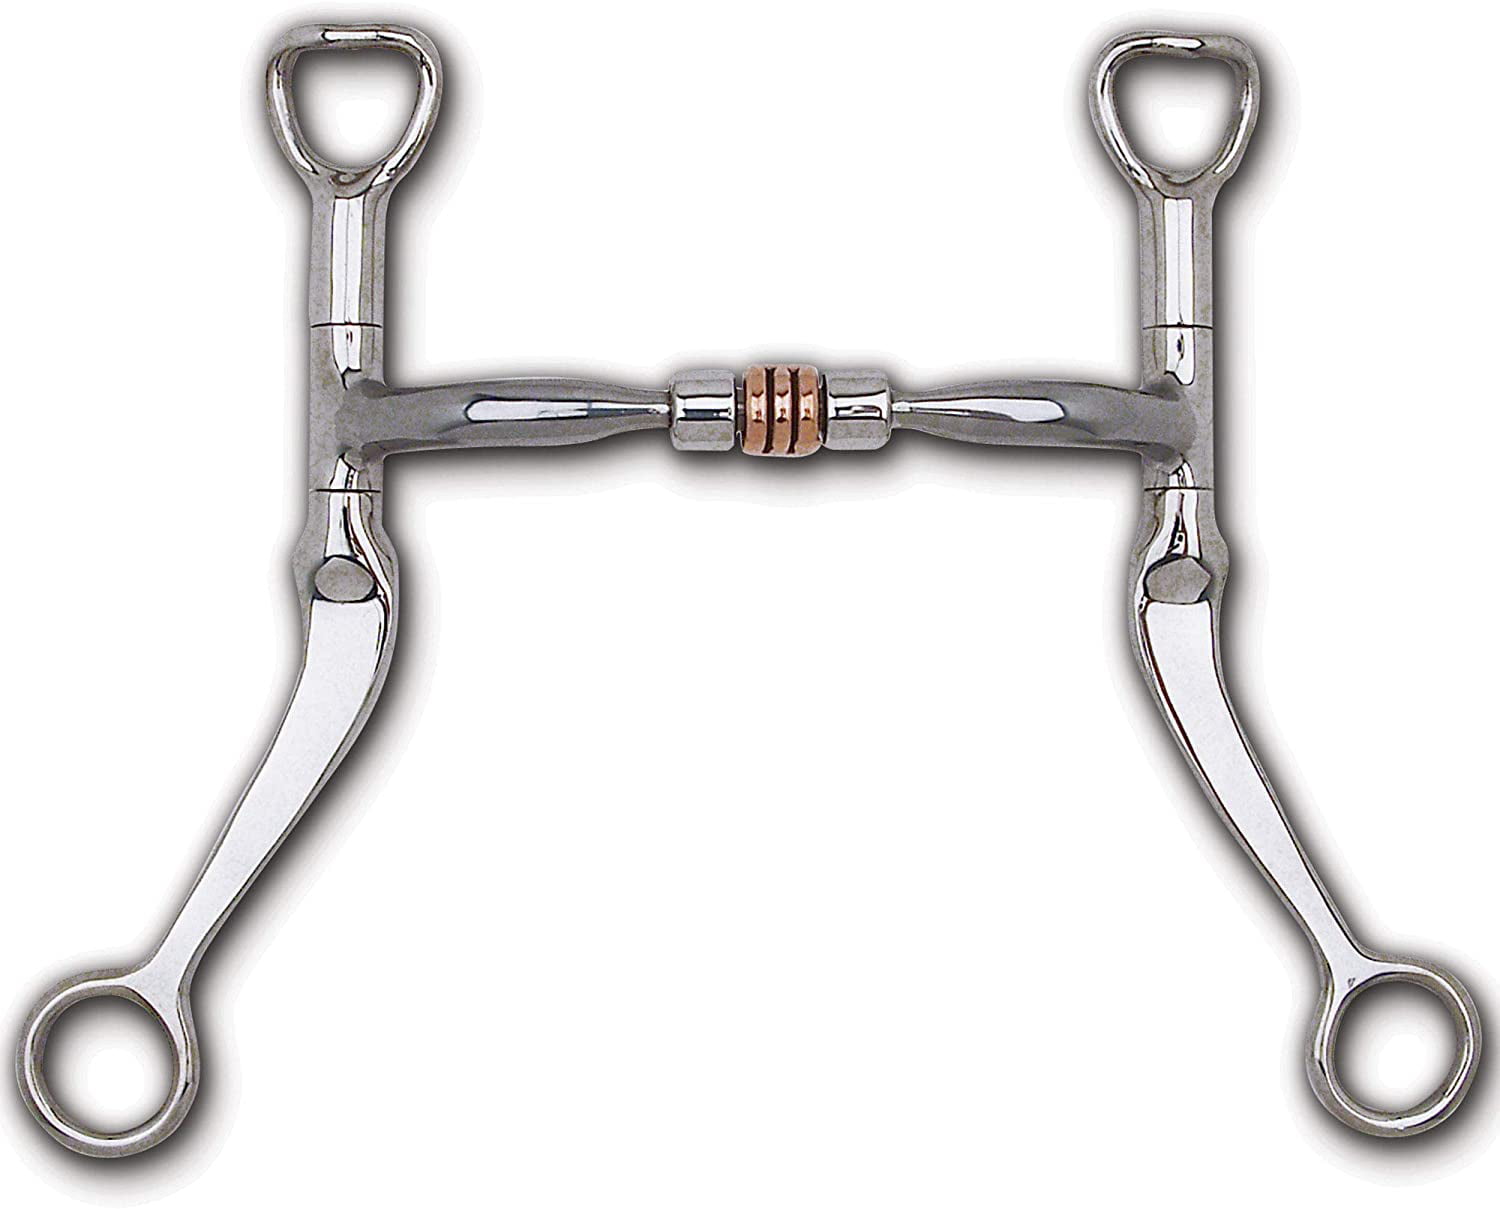 Myler Flat Shank with Sweet Iron Comfort Snaffle with Copper Roller MB 03 